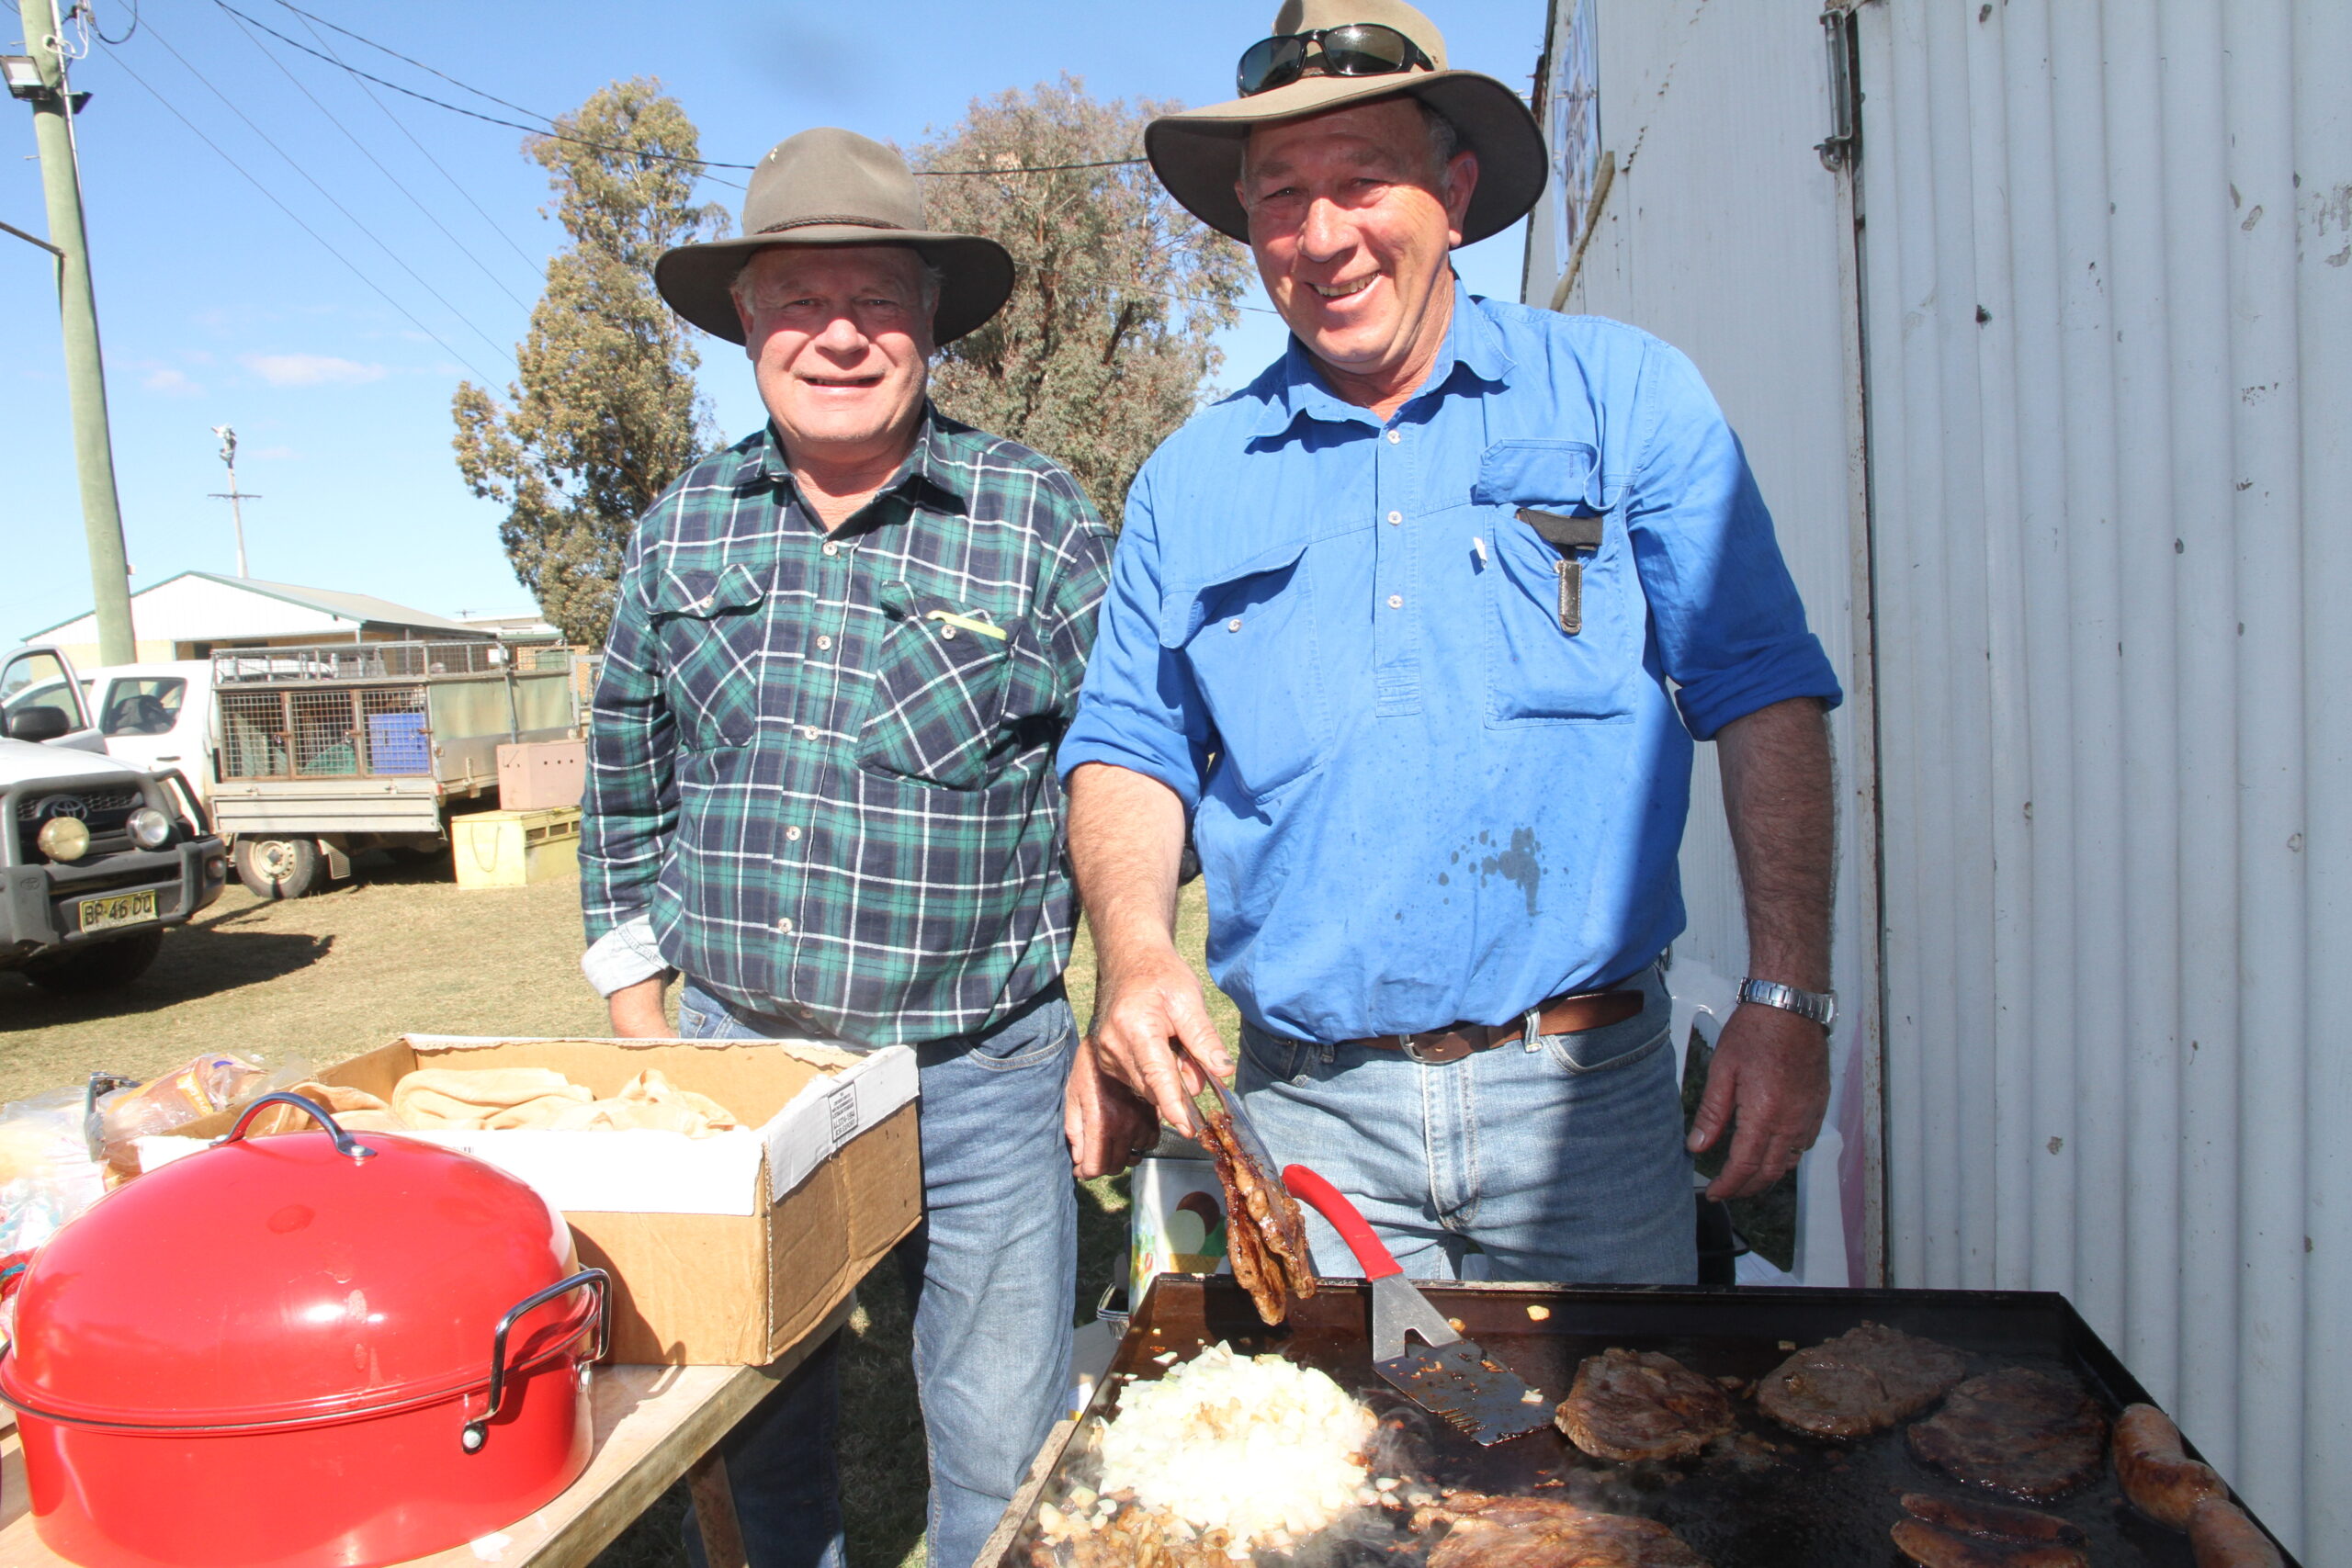 Geoff Hine, Uralla, and Laurence Bruce man the barbecue.